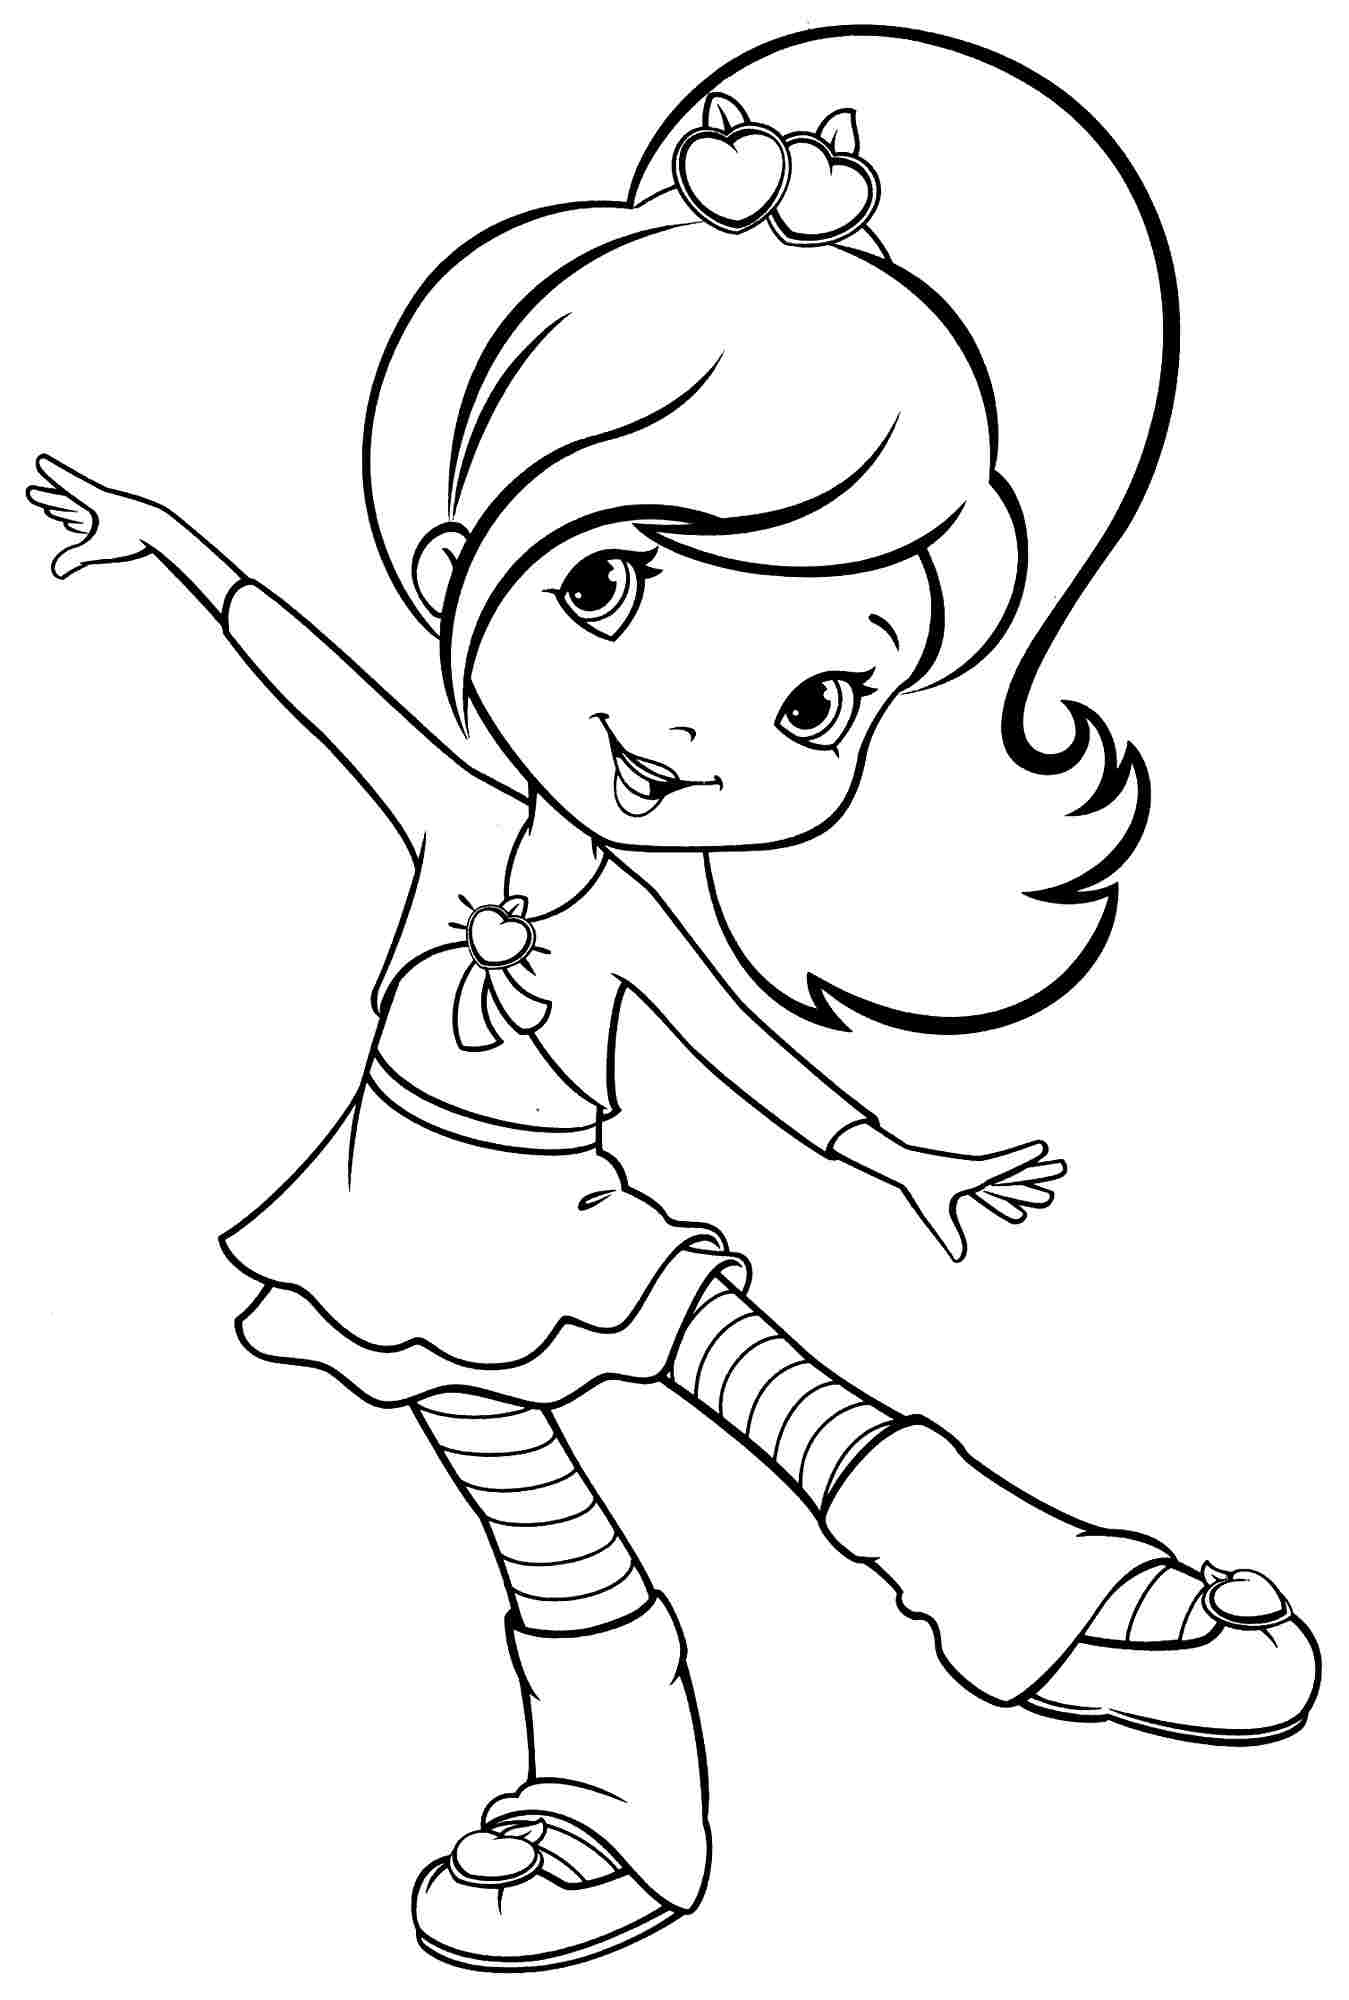 https://www.bestcoloringpagesforkids.com/wp-content/uploads/2018/06/Fun-Coloring-Pages-for-Girls.jpg